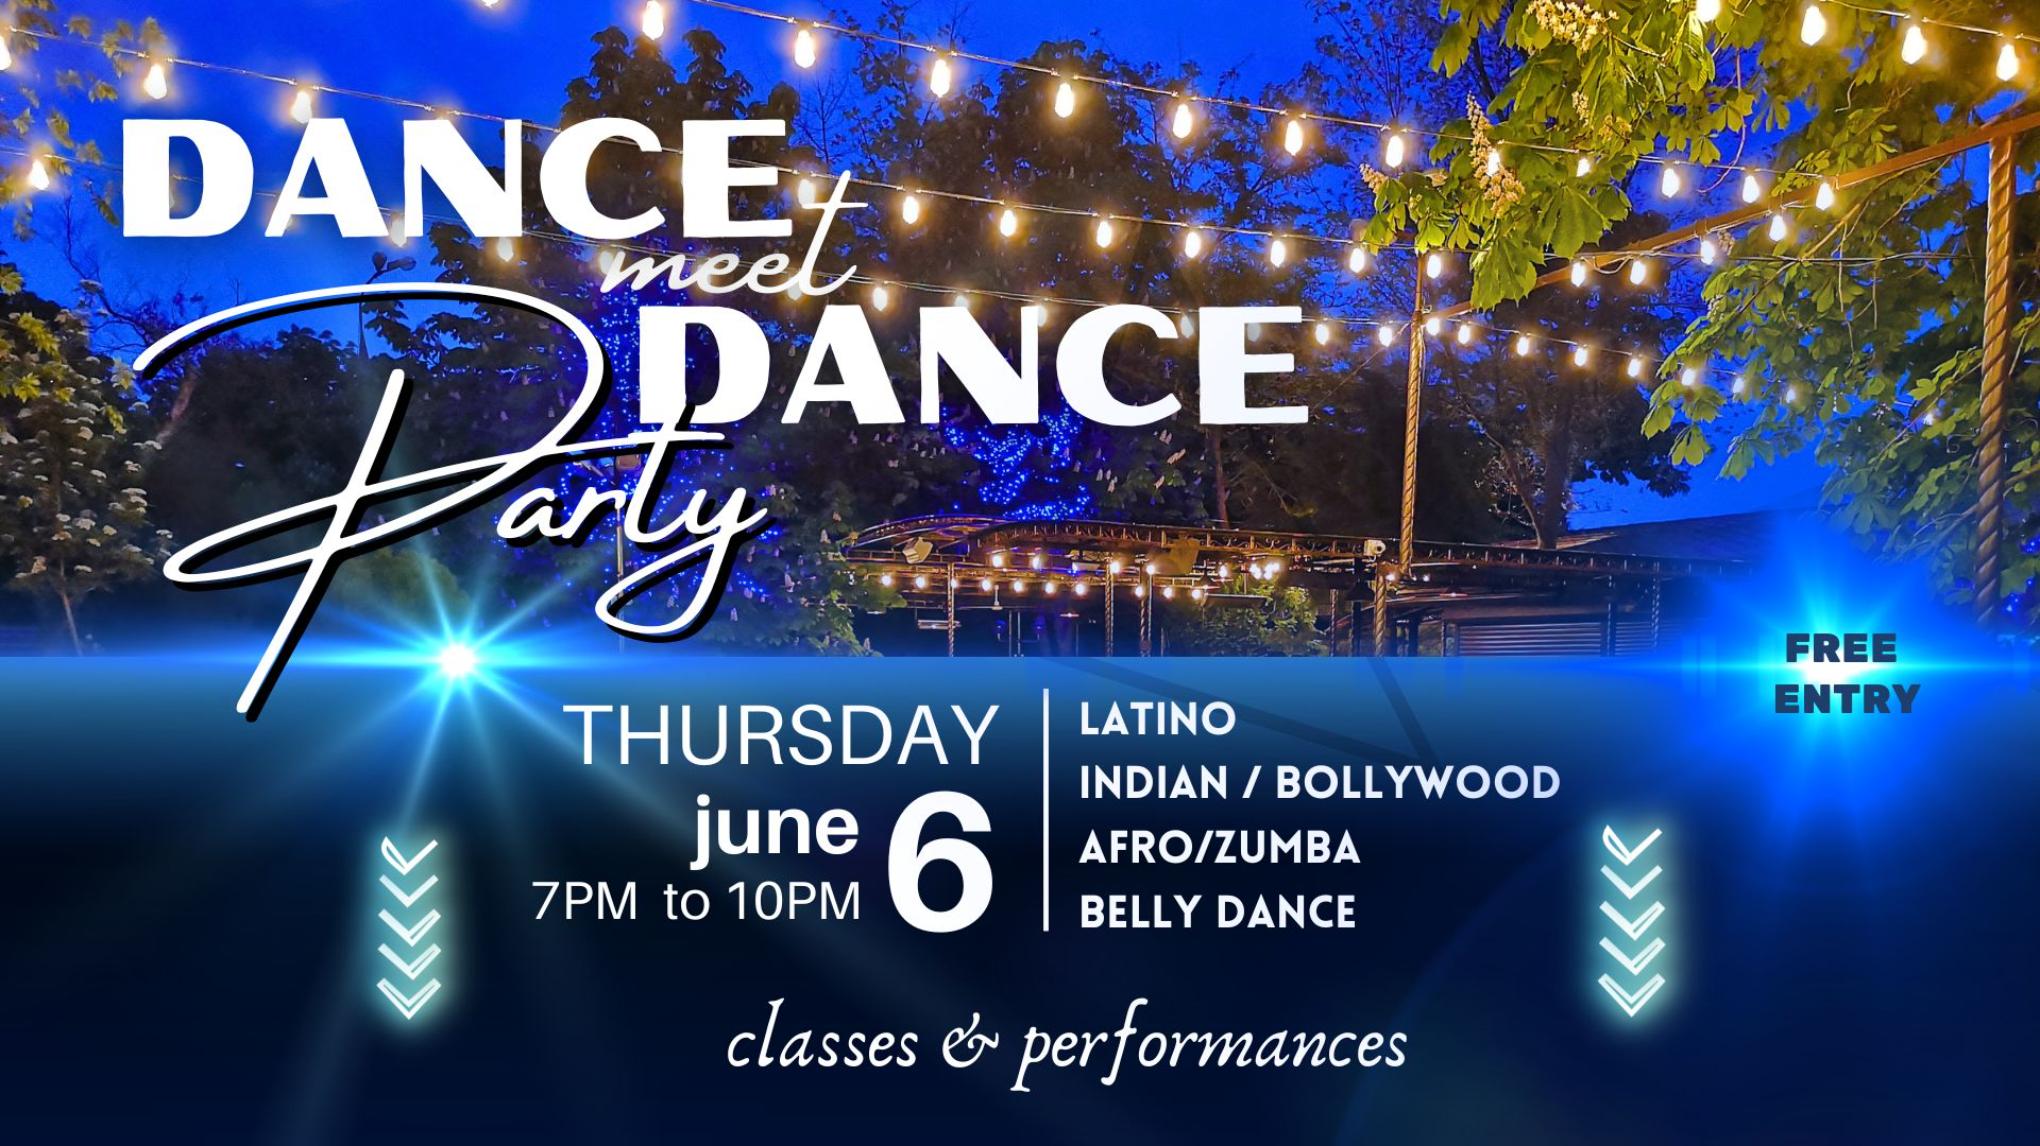 DANCE MEET DANCE PARTY _ JUNE 6TH from 7PM TO 10PM